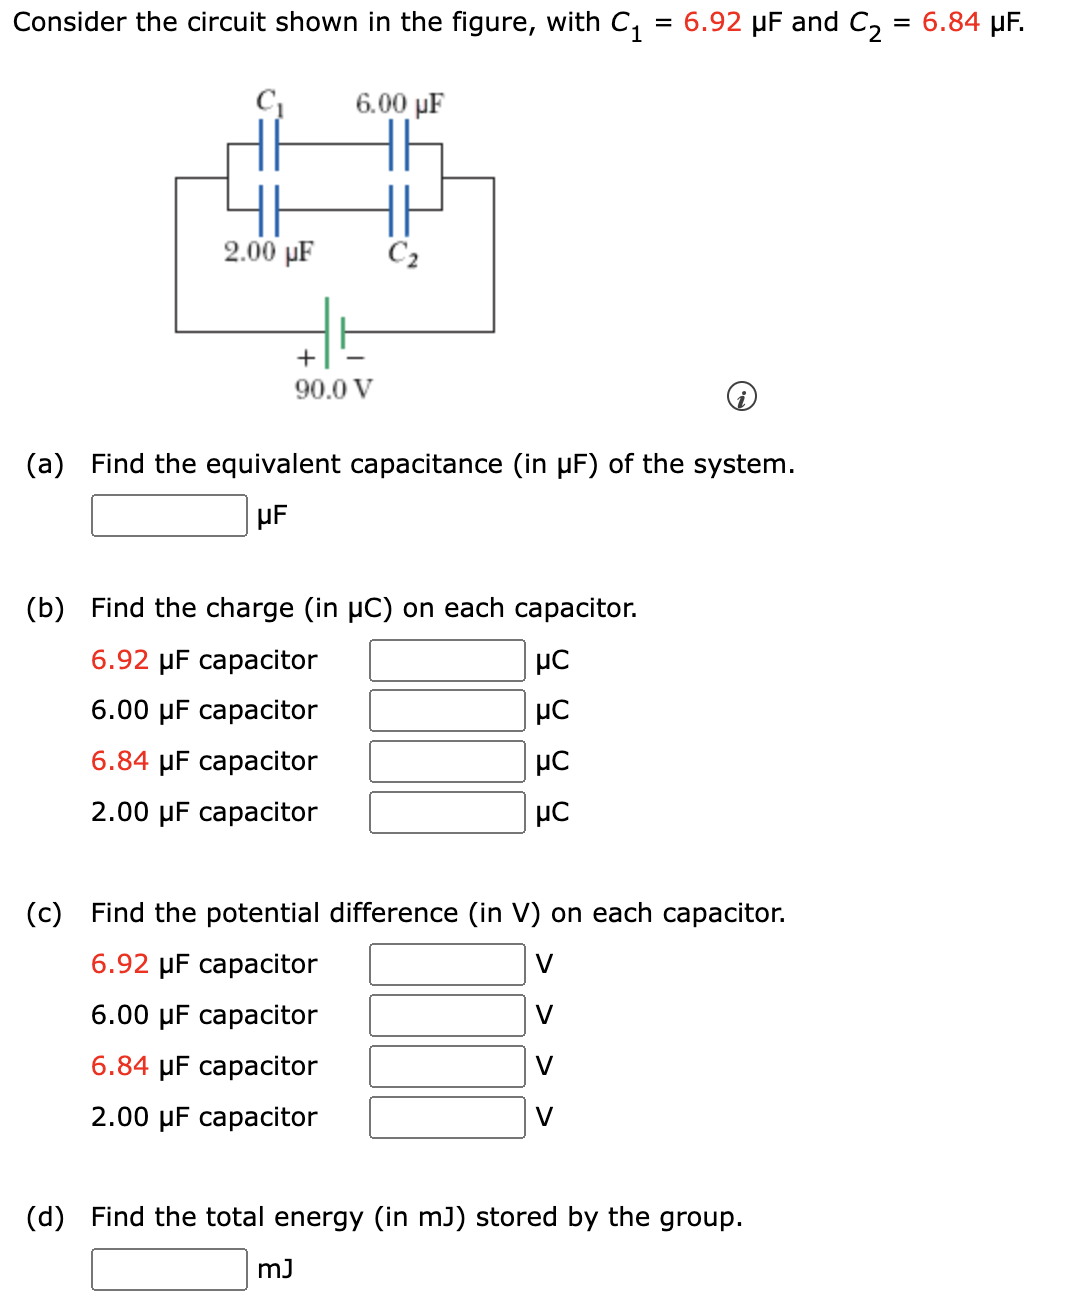 Consider the circuit shown in the figure, with C₁ = 6.92 µF and C₂ = 6.84 µF.
2.00 µF
6.00 µF
+
90.0 V
(a) Find the equivalent capacitance (in μF)
μF
(b) Find the charge (in µC) on each capacitor.
6.92 μF capacitor
6.00 μF capacitor
6.84 μF capacitor
2.00 μF capacitor
mJ
9999
(c) Find the potential difference (in V) on each capacitor.
6.92 μF capacitor
V
6.00 μF capacitor
V
6.84 μF capacitor
2.00 μF capacitor
the system.
V
(d) Find the total energy (in mJ) stored by the group.